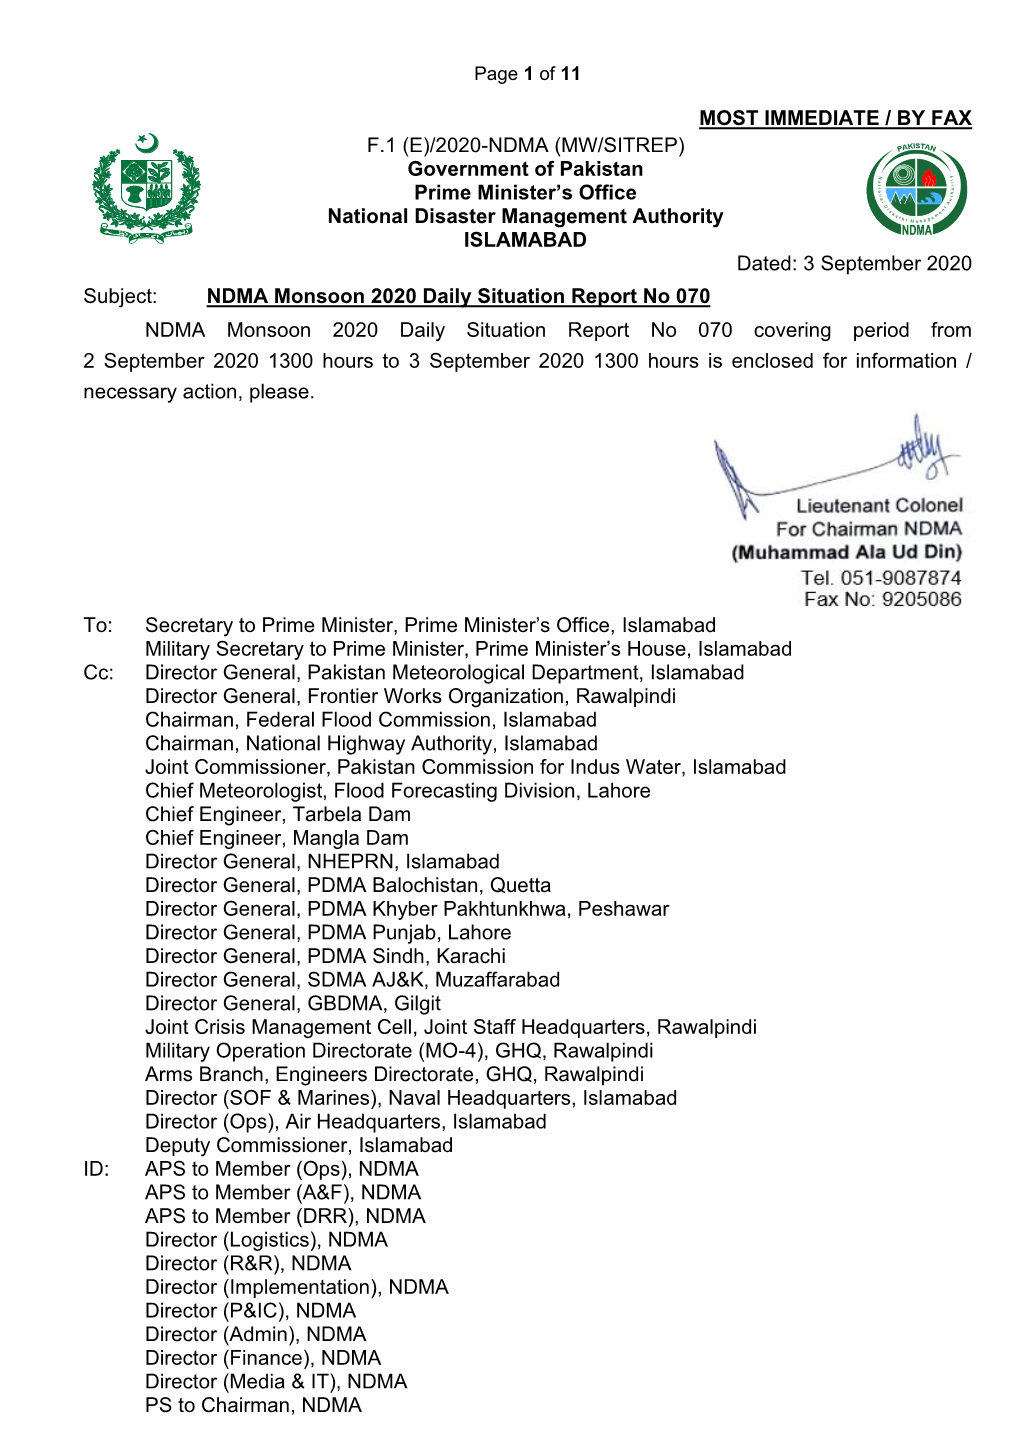 2020-NDMA (MW/SITREP) Government of Pakistan Prime Minister’S Office National Disaster Management Authority ISLAMABAD Dated: 3 September 2020